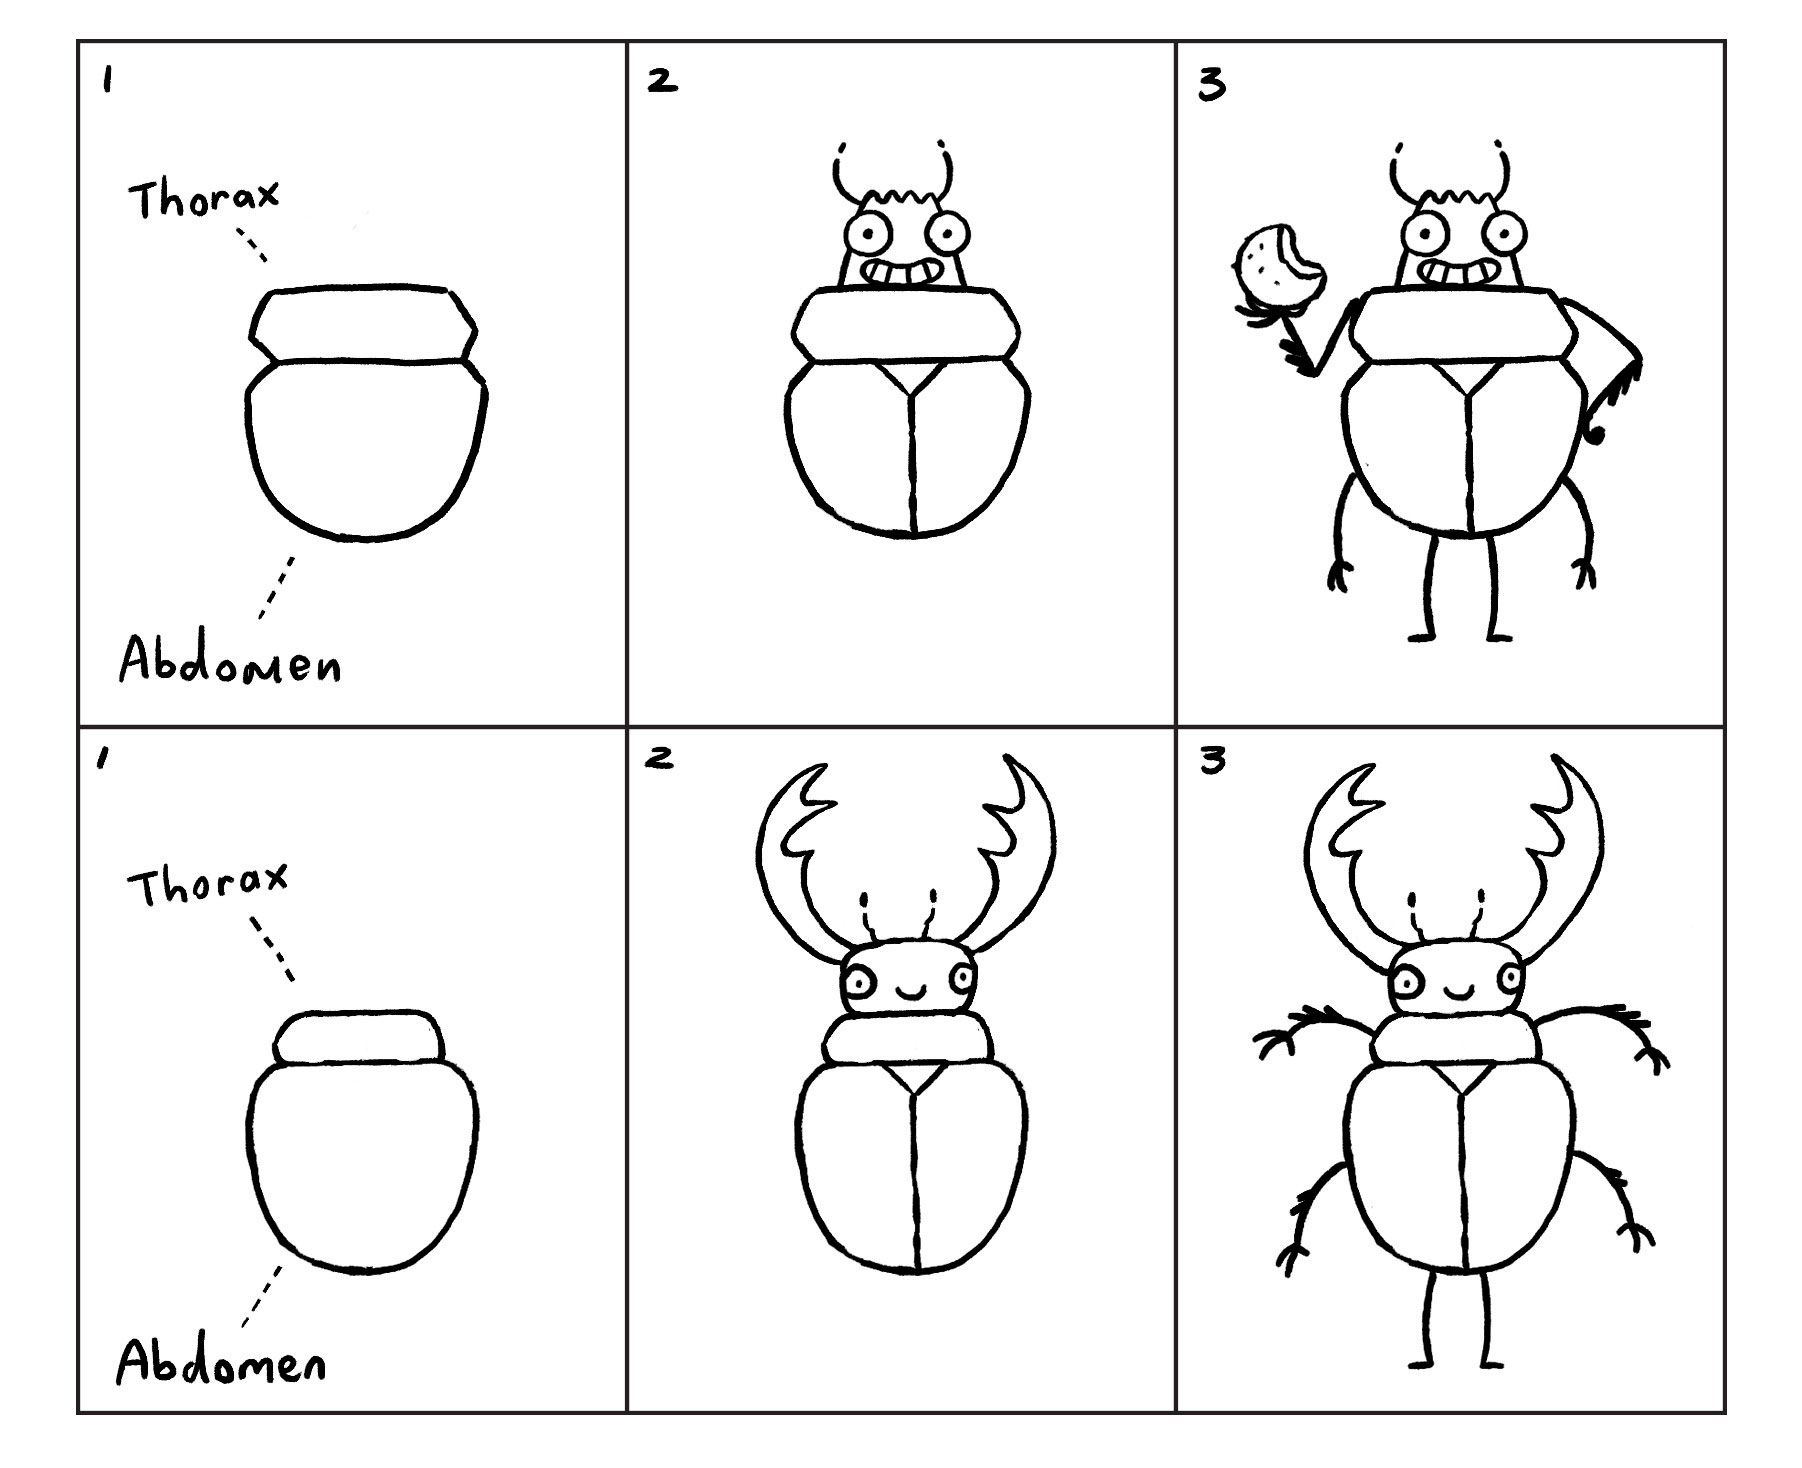 How to draw a dung beetle